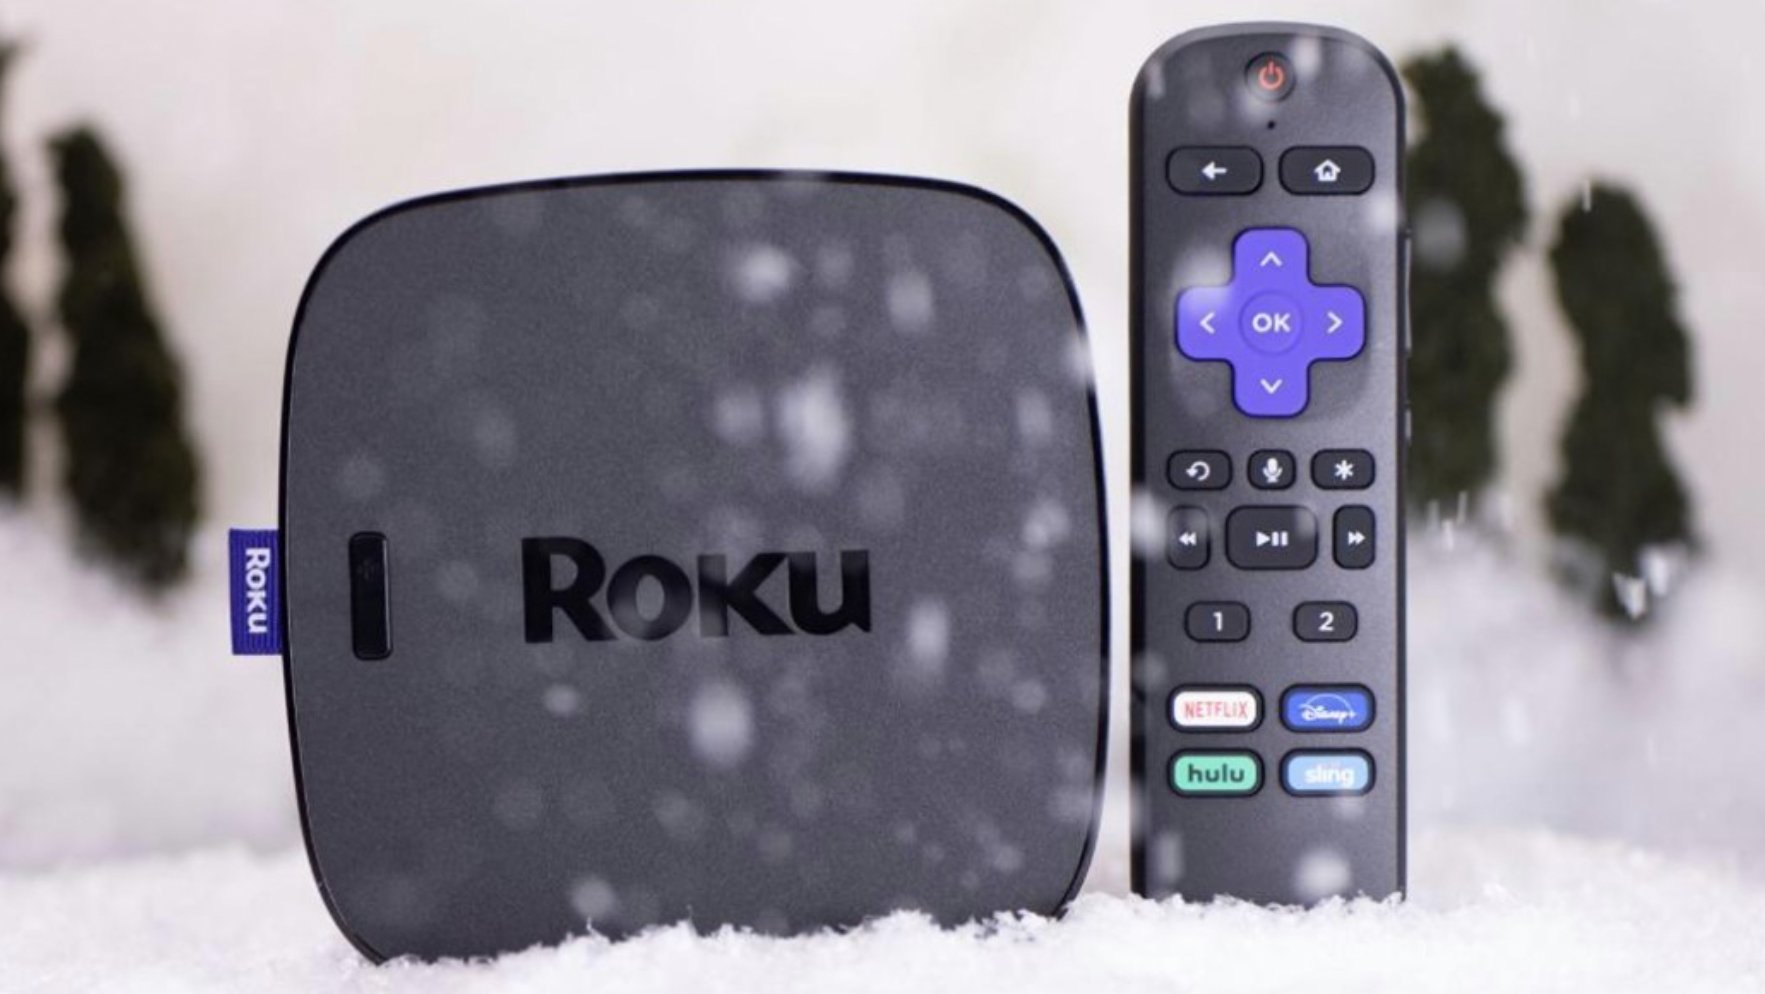 barry paulin recommends How To Get Pornhub On Roku